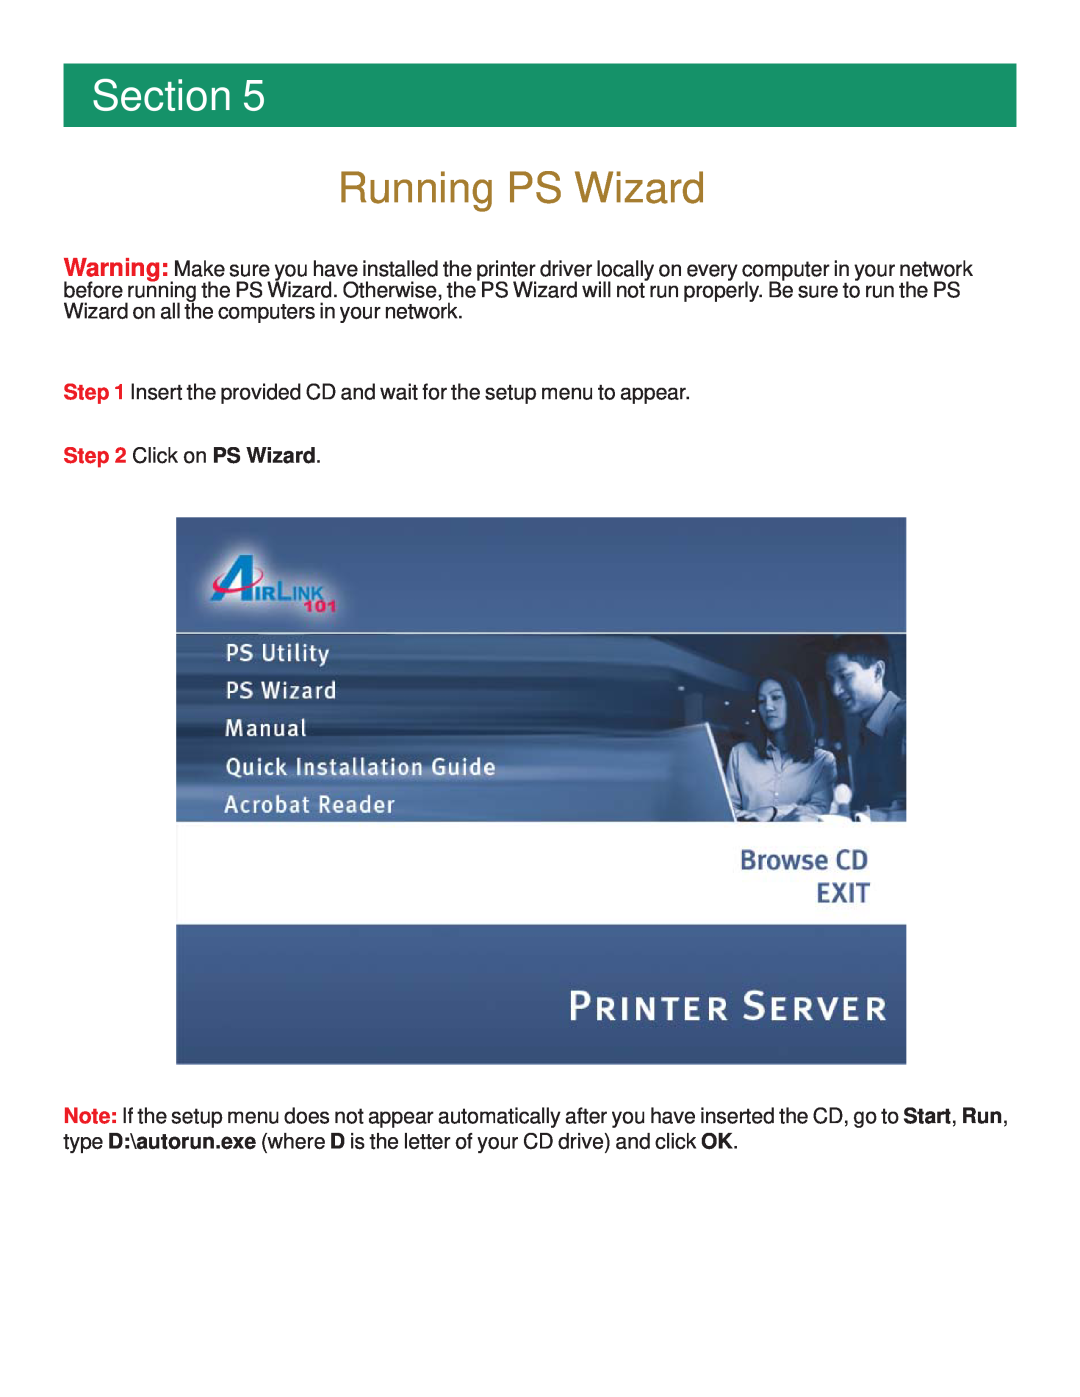 Airlink101 APSUSB1 manual Running PS Wizard, Section 